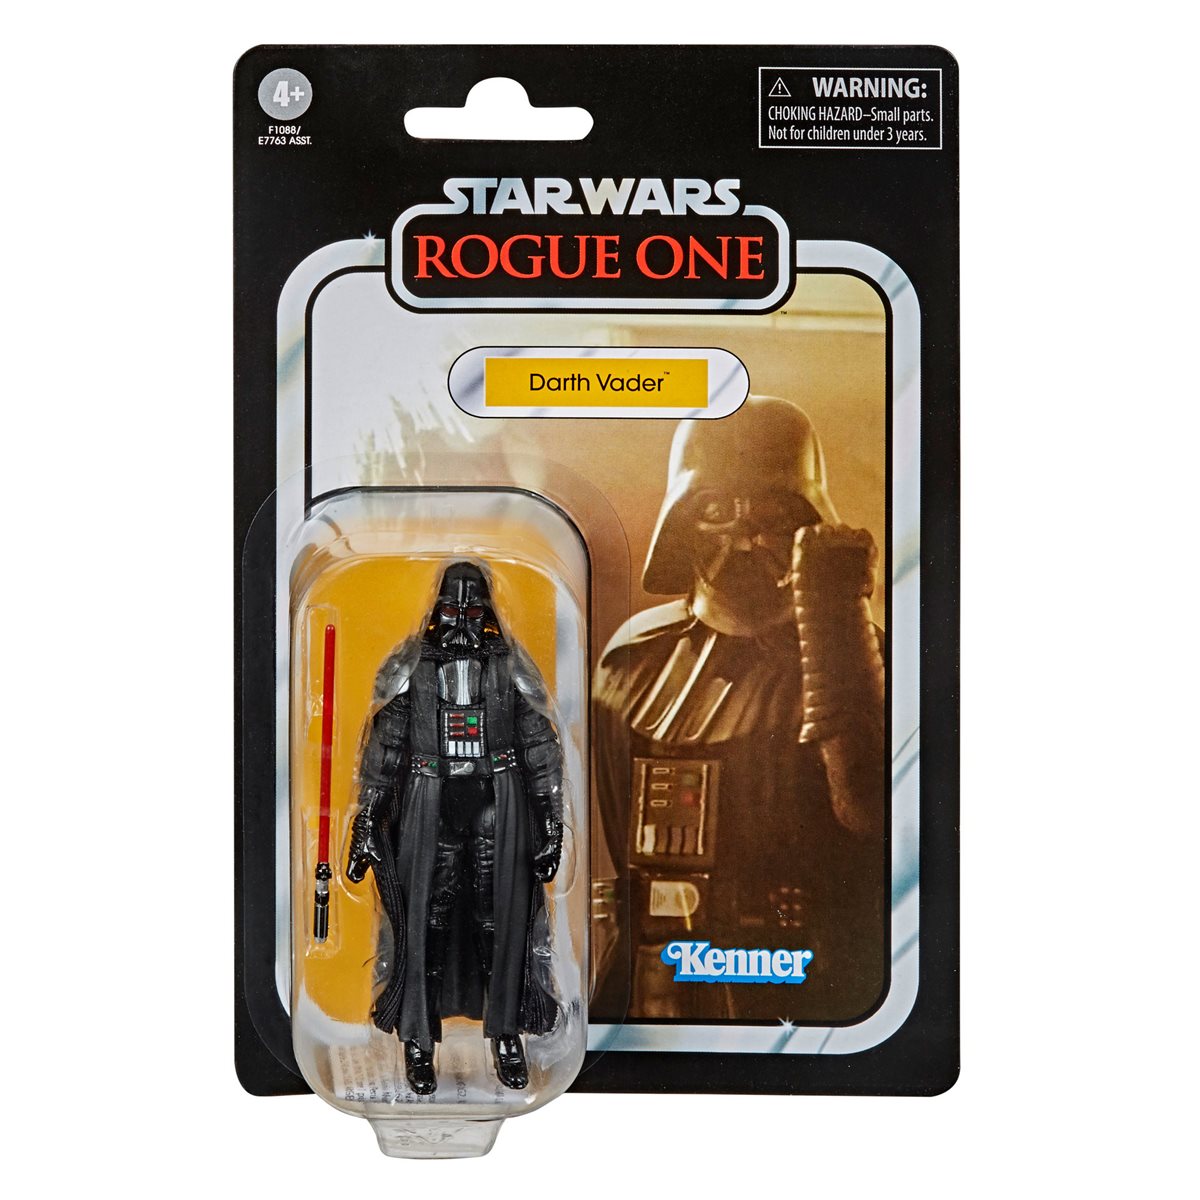 Brand New Sealed Star Wars Rogue One Darth Vader The Vintage Collection Figure 